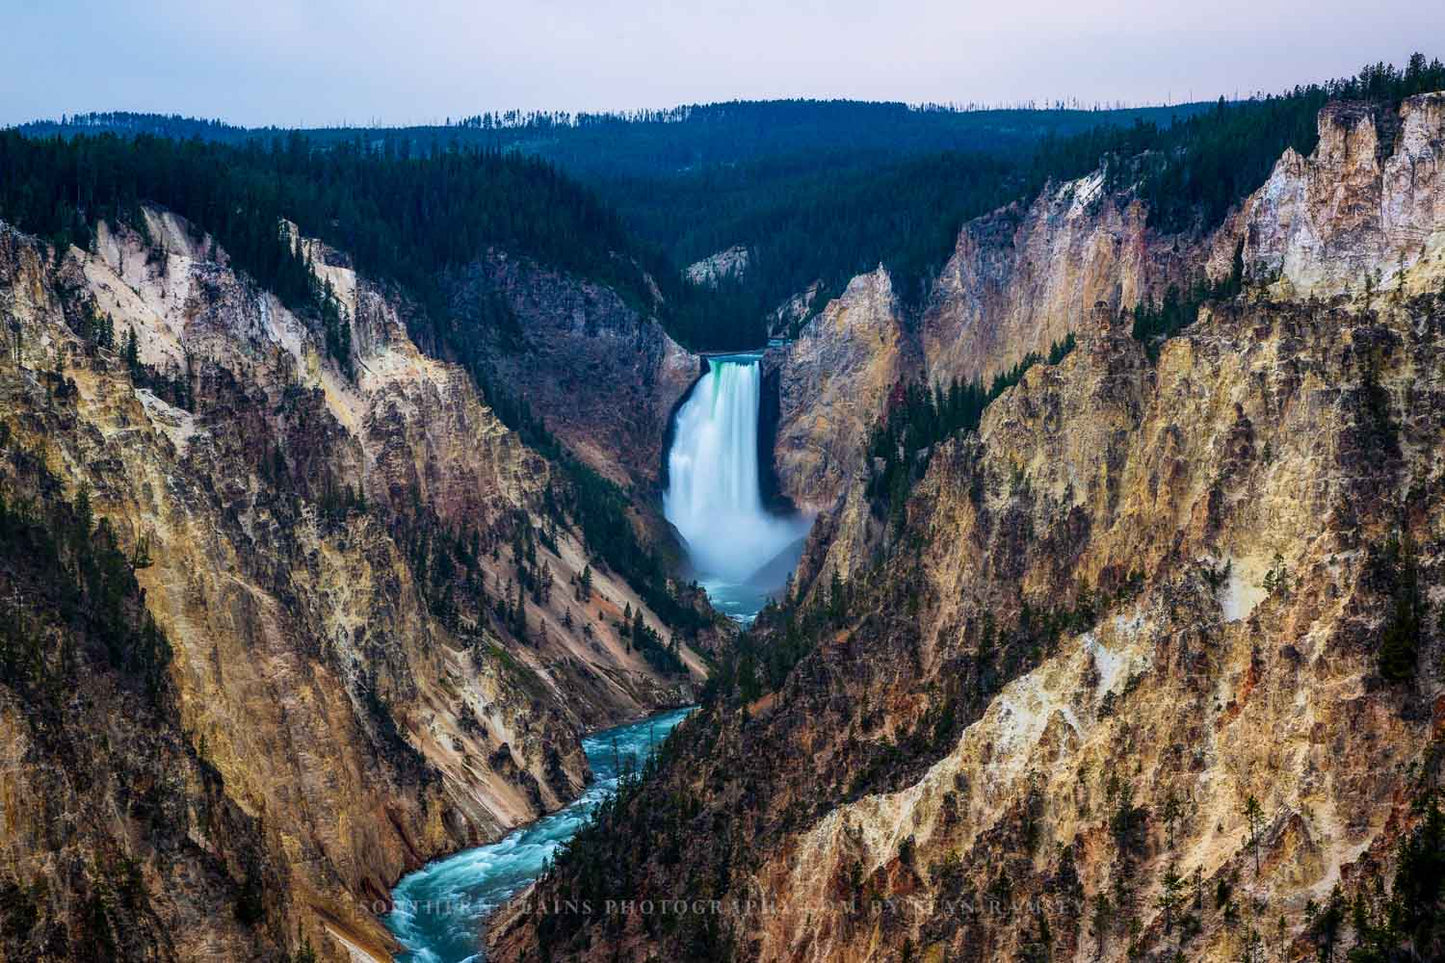 Western landscape photography print of Lower Falls in the Grand Canyon of the Yellowstone on a rainy evening in Yellowstone National Park, Wyoming by Sean Ramsey of Southern Plains Photography.